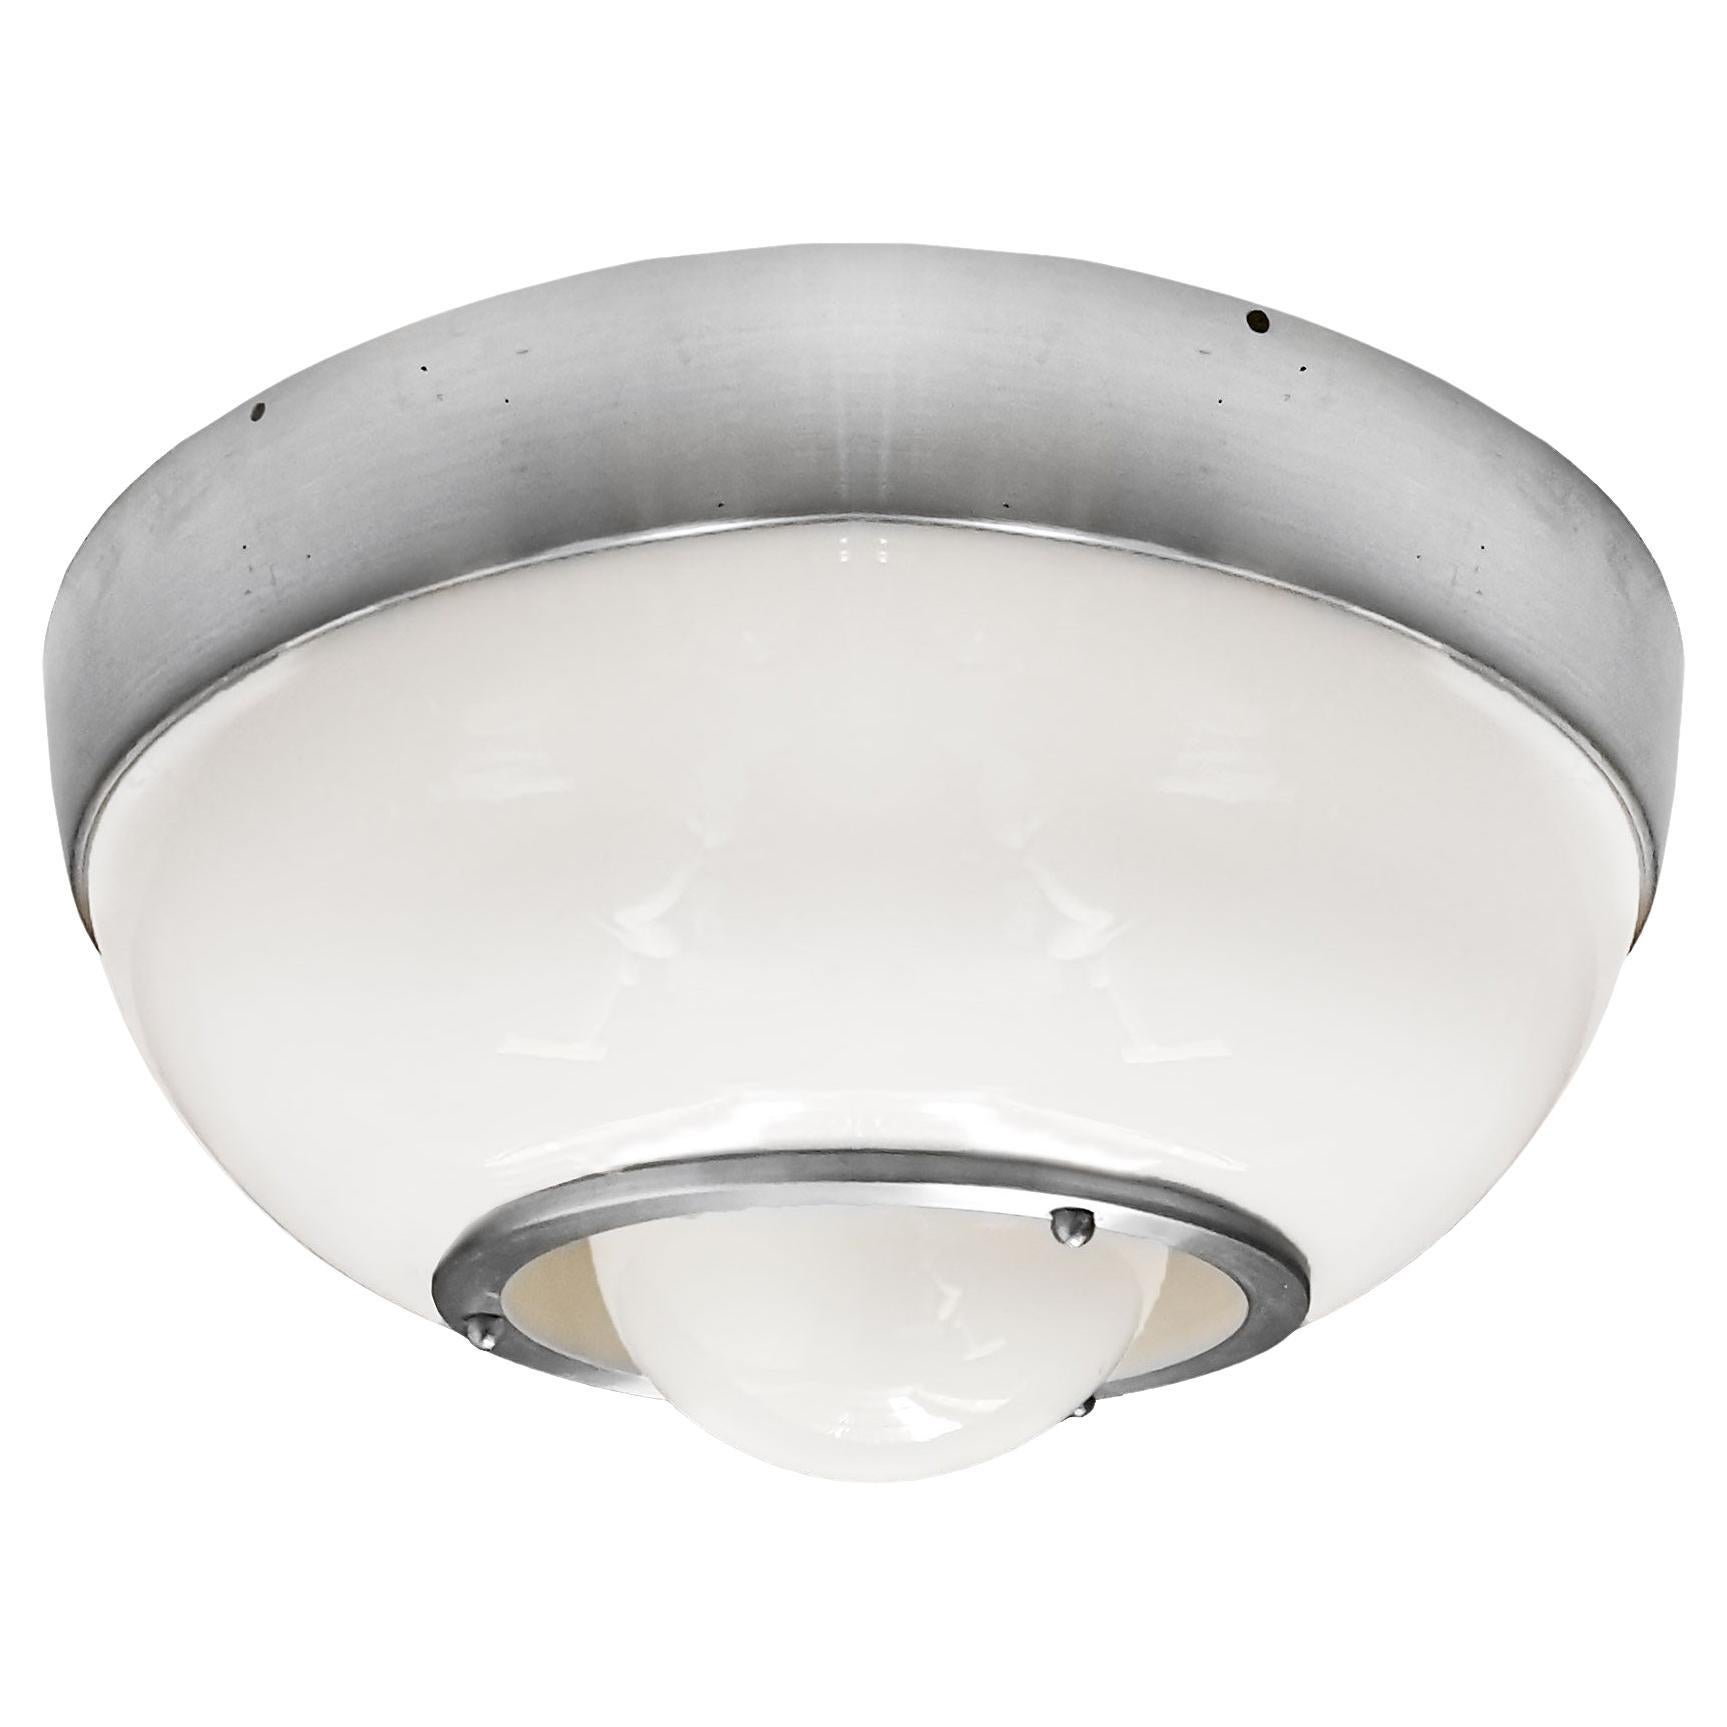 Mid-Century Modern Ceiling Light by Pia Guidetti Grippa for Lumi - Italy For Sale